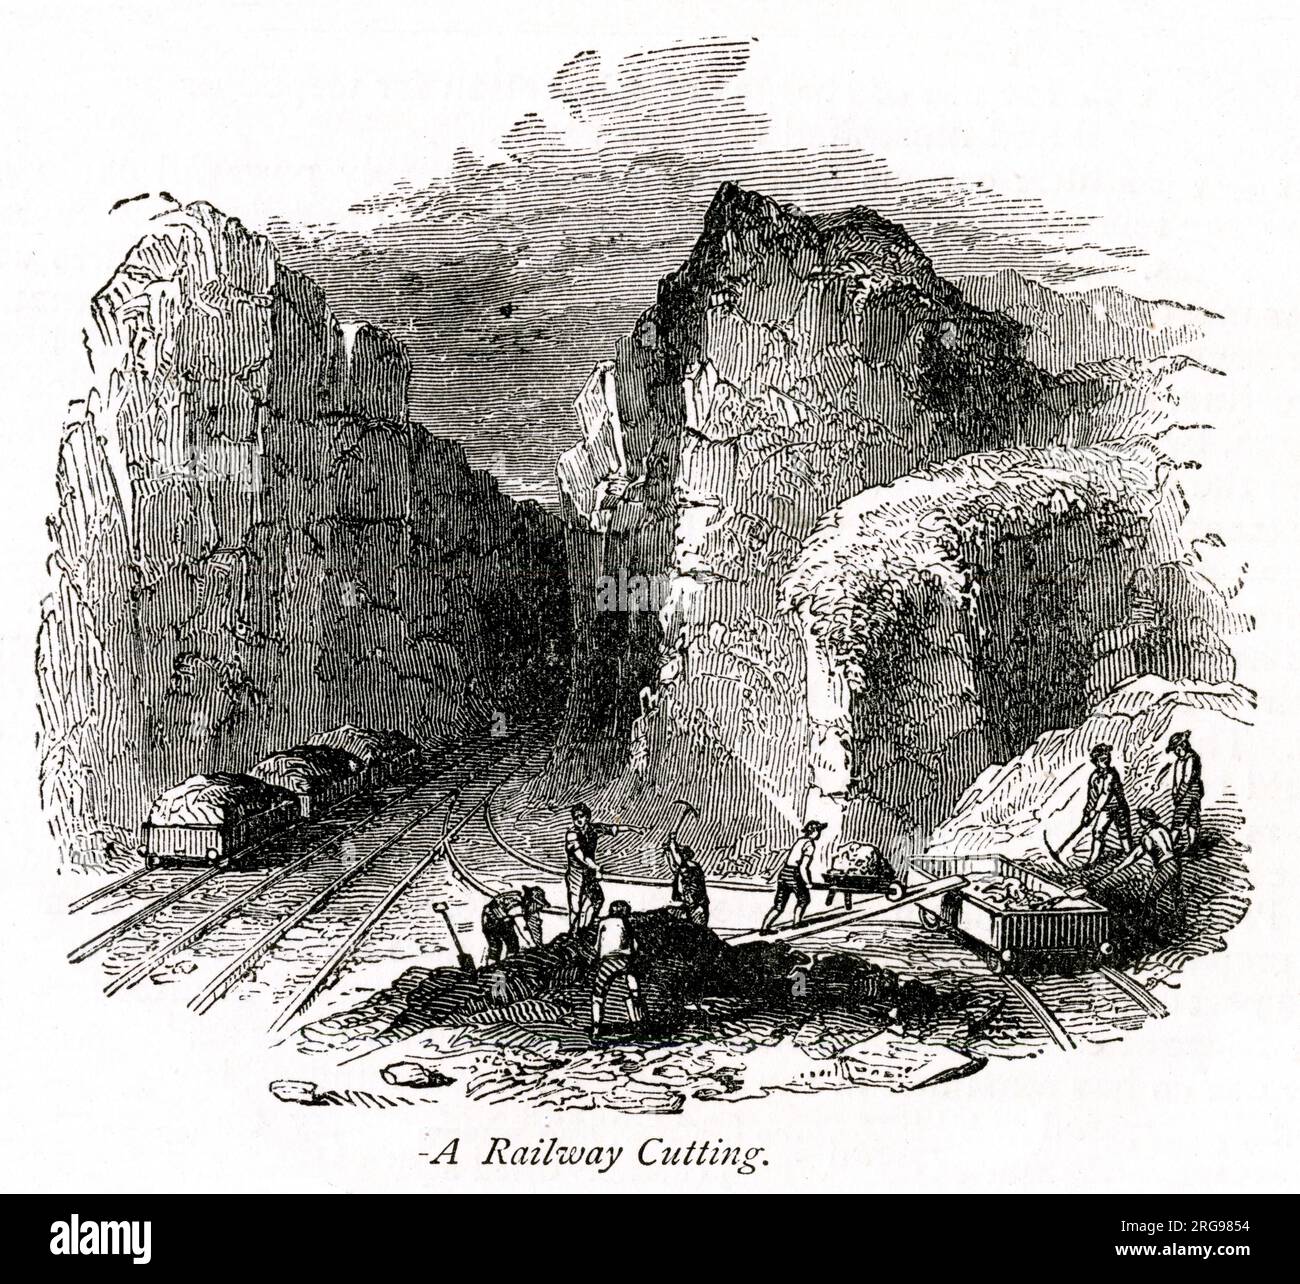 Railway cutting works in progress in the early days of rail expansion. Stock Photo